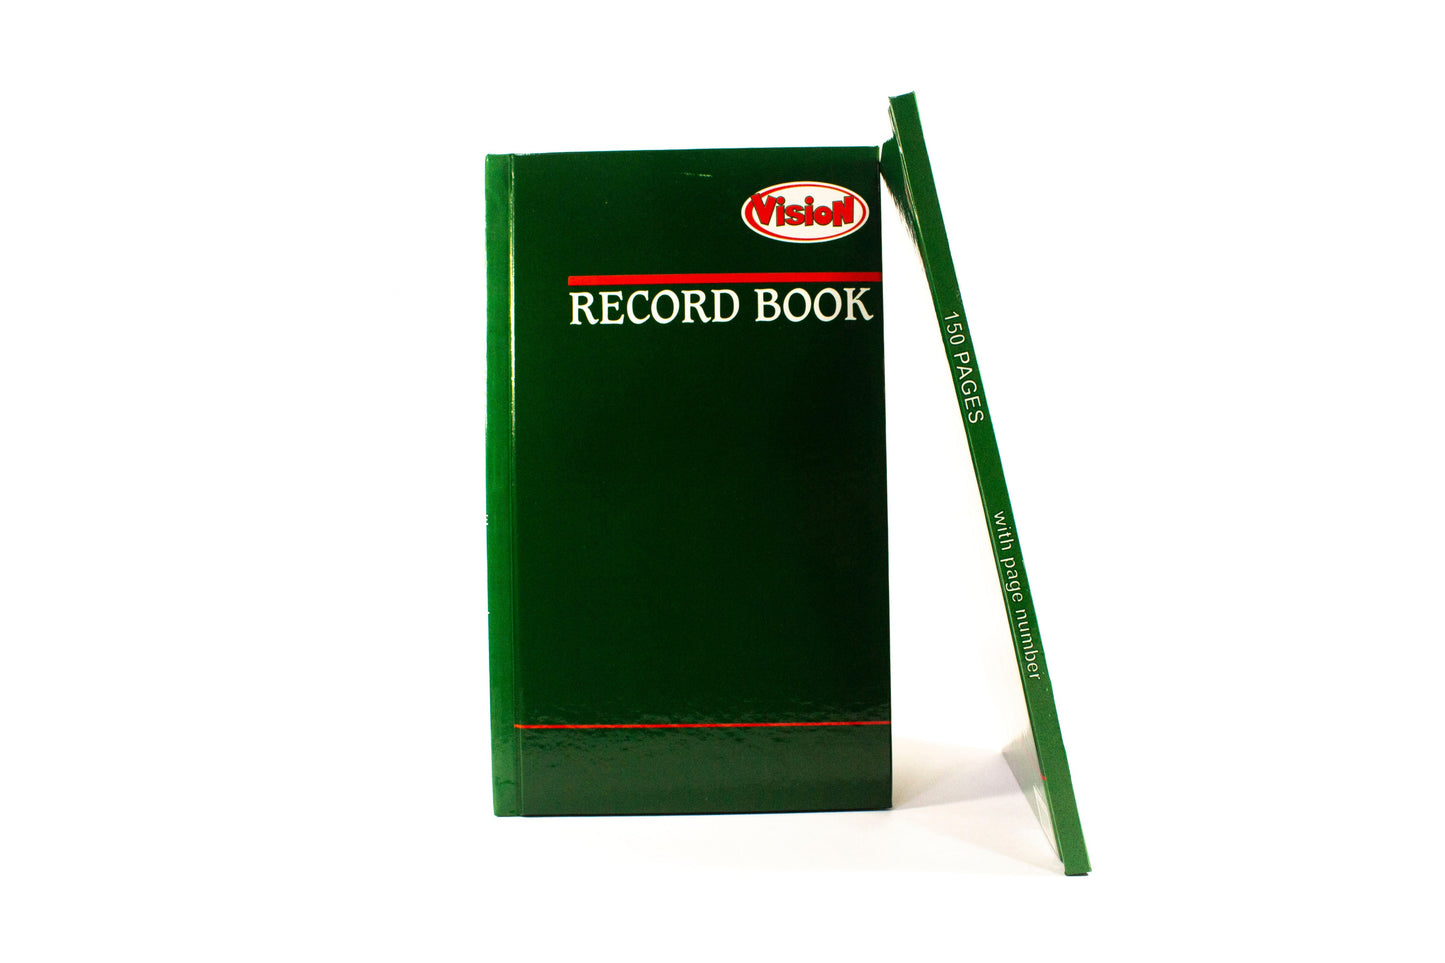 Vision Record Book with Page Number